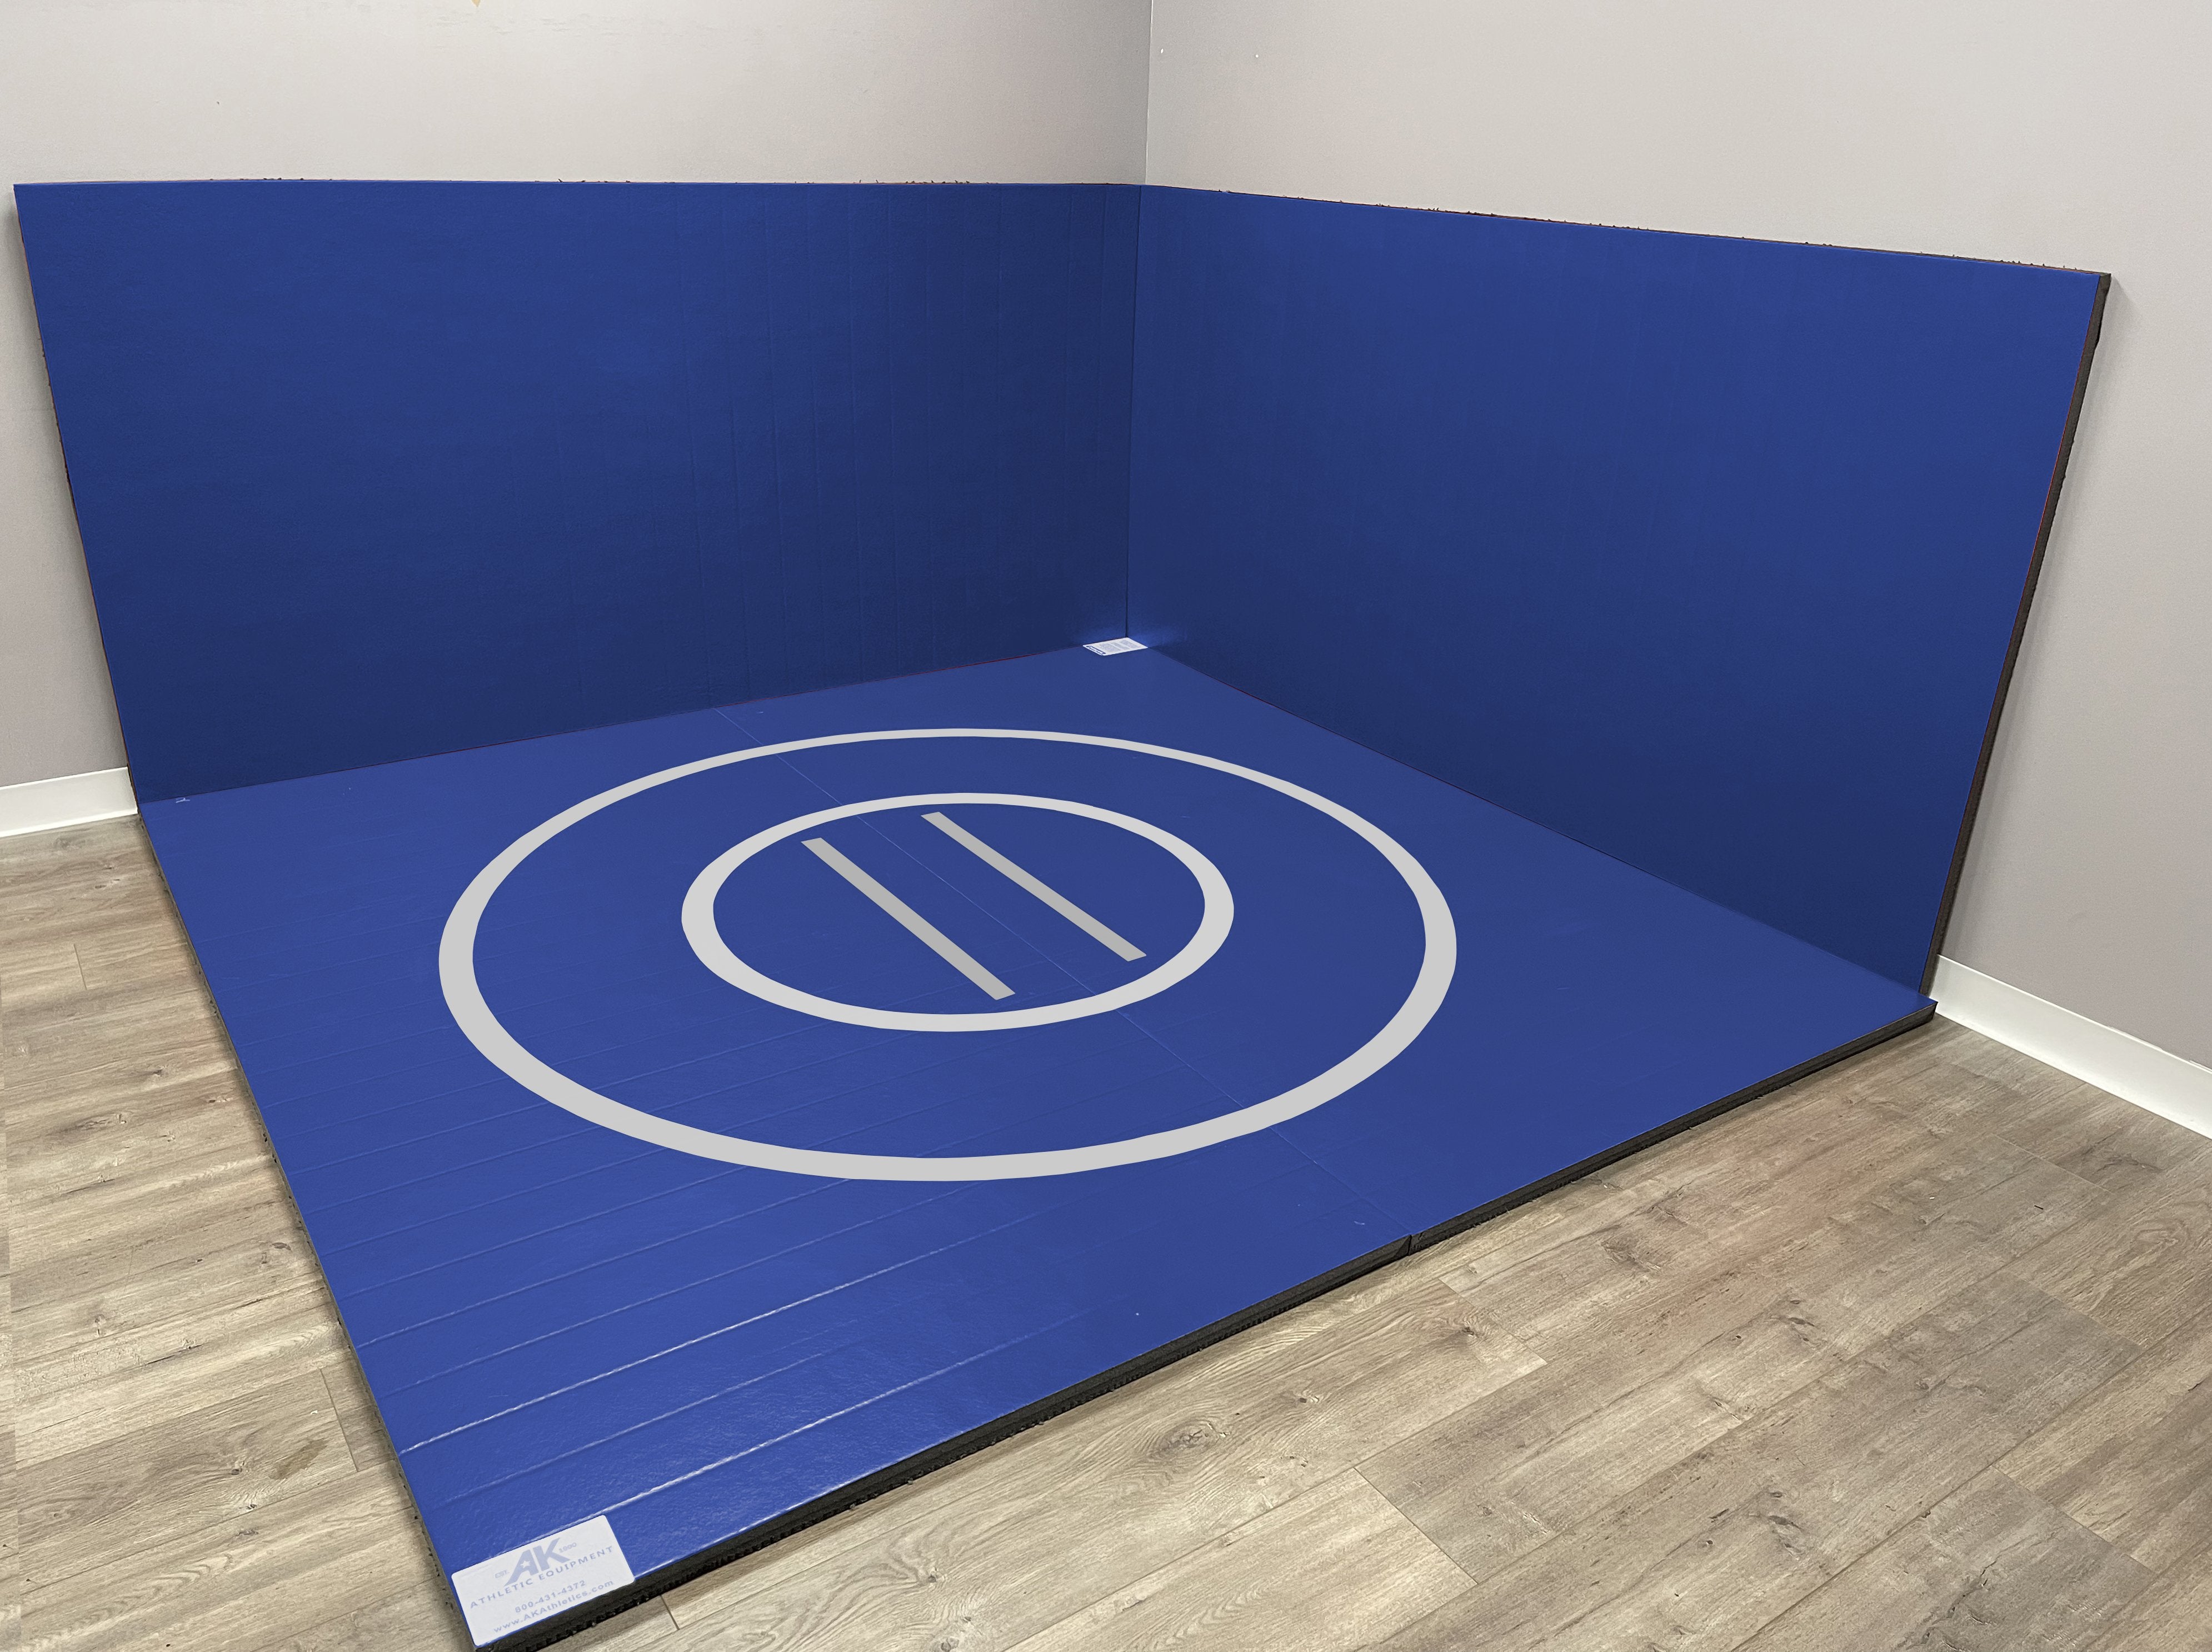 Holiday Shop Instant Wrestling Room 8' x 8' wrestling mat and Removable Roll Up Wall Pads Package